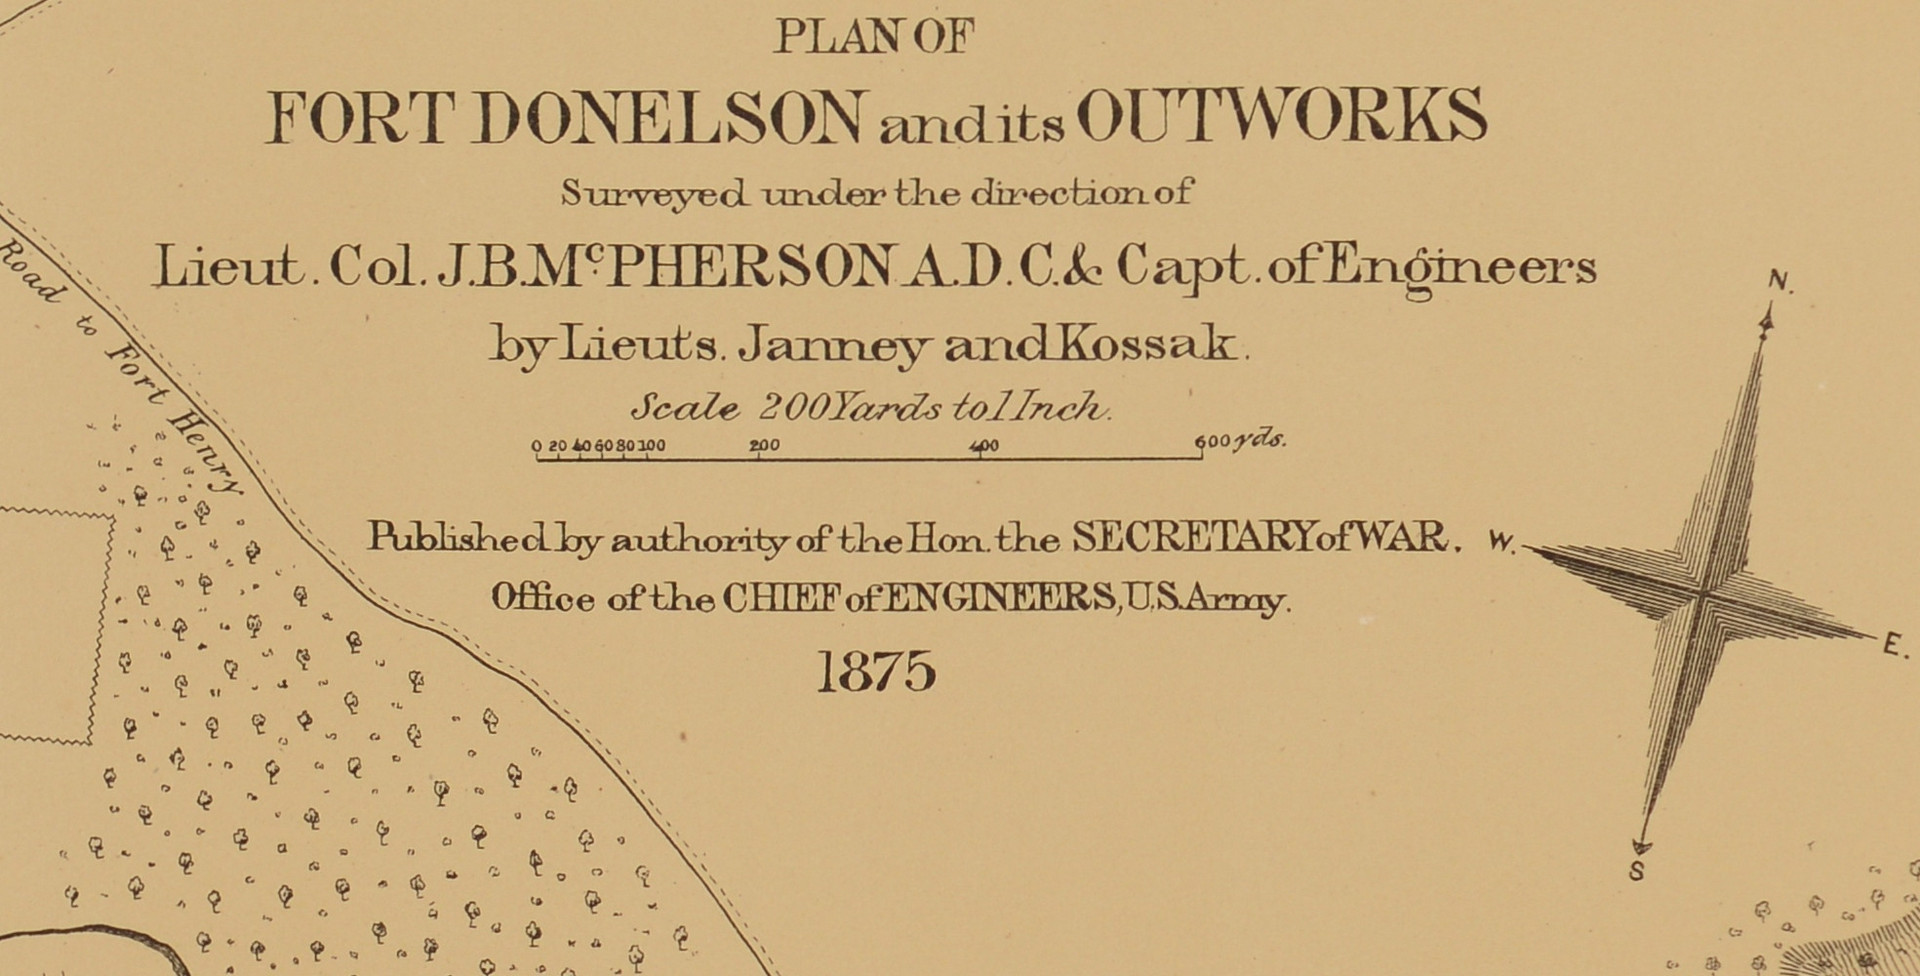 Lot 106: 2 Maps: Ft. Henry & Ft. Donelson